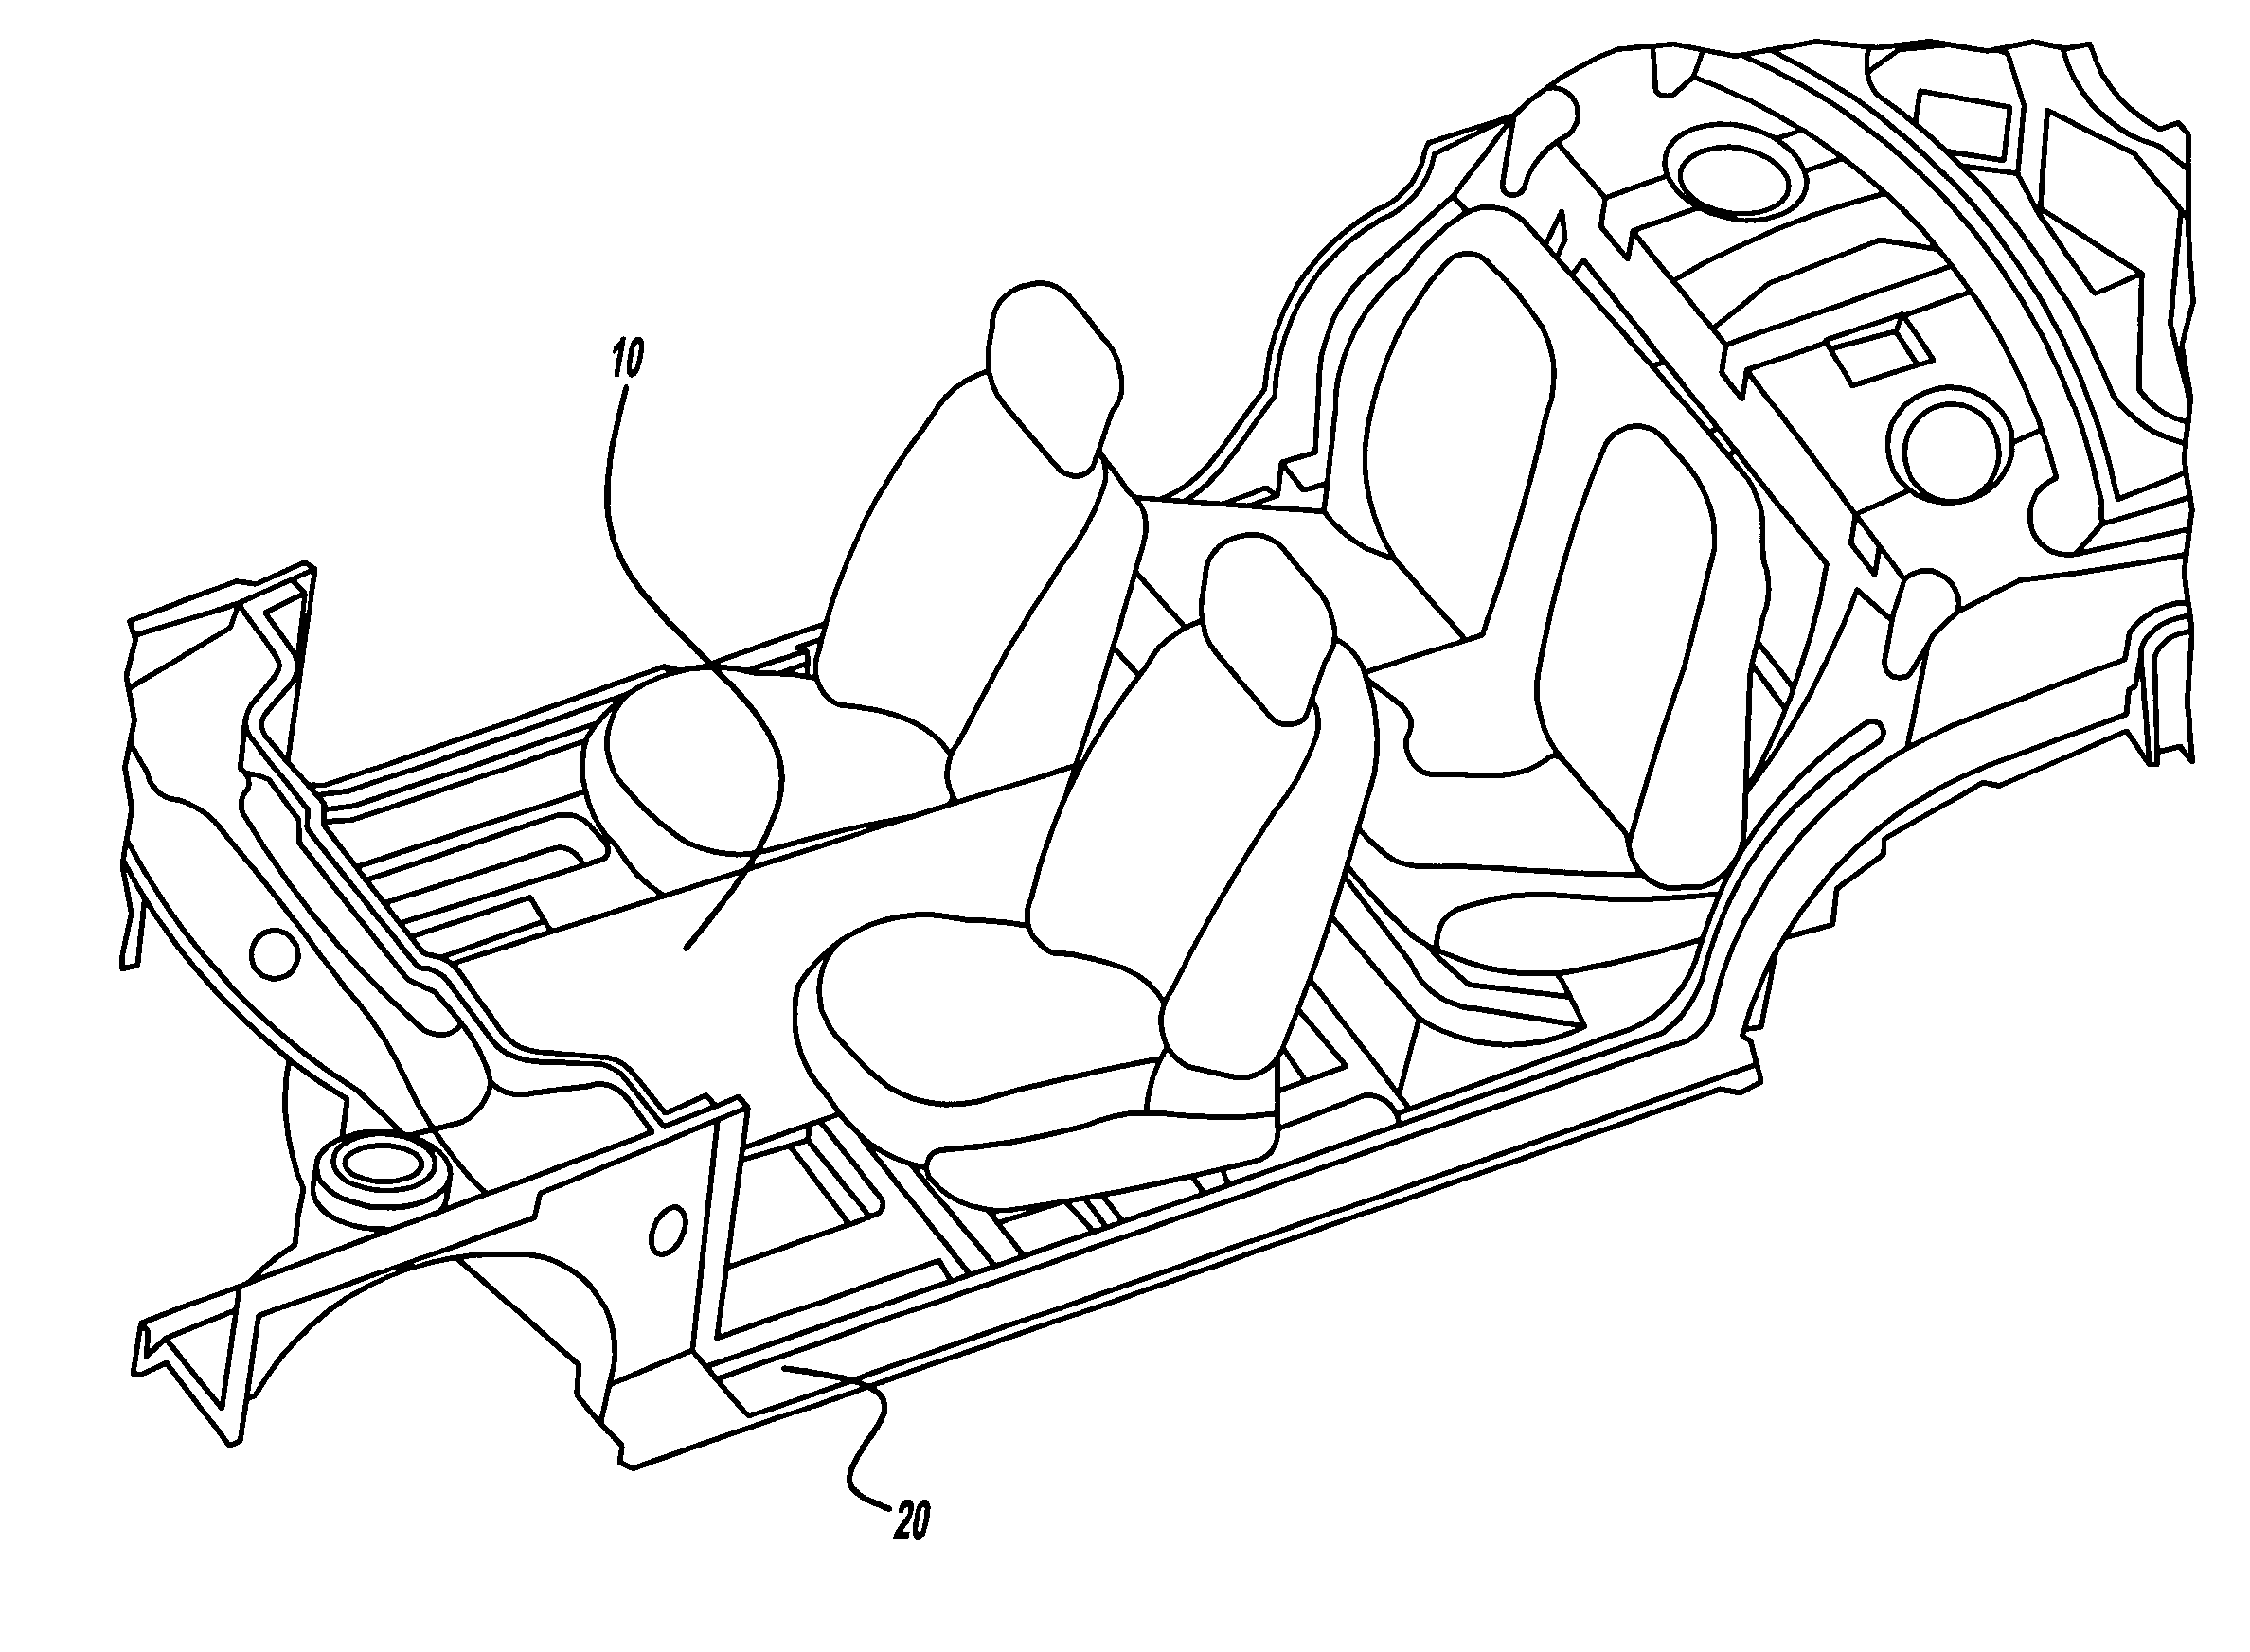 Vehicle frame with integrated high pressure fuel tank